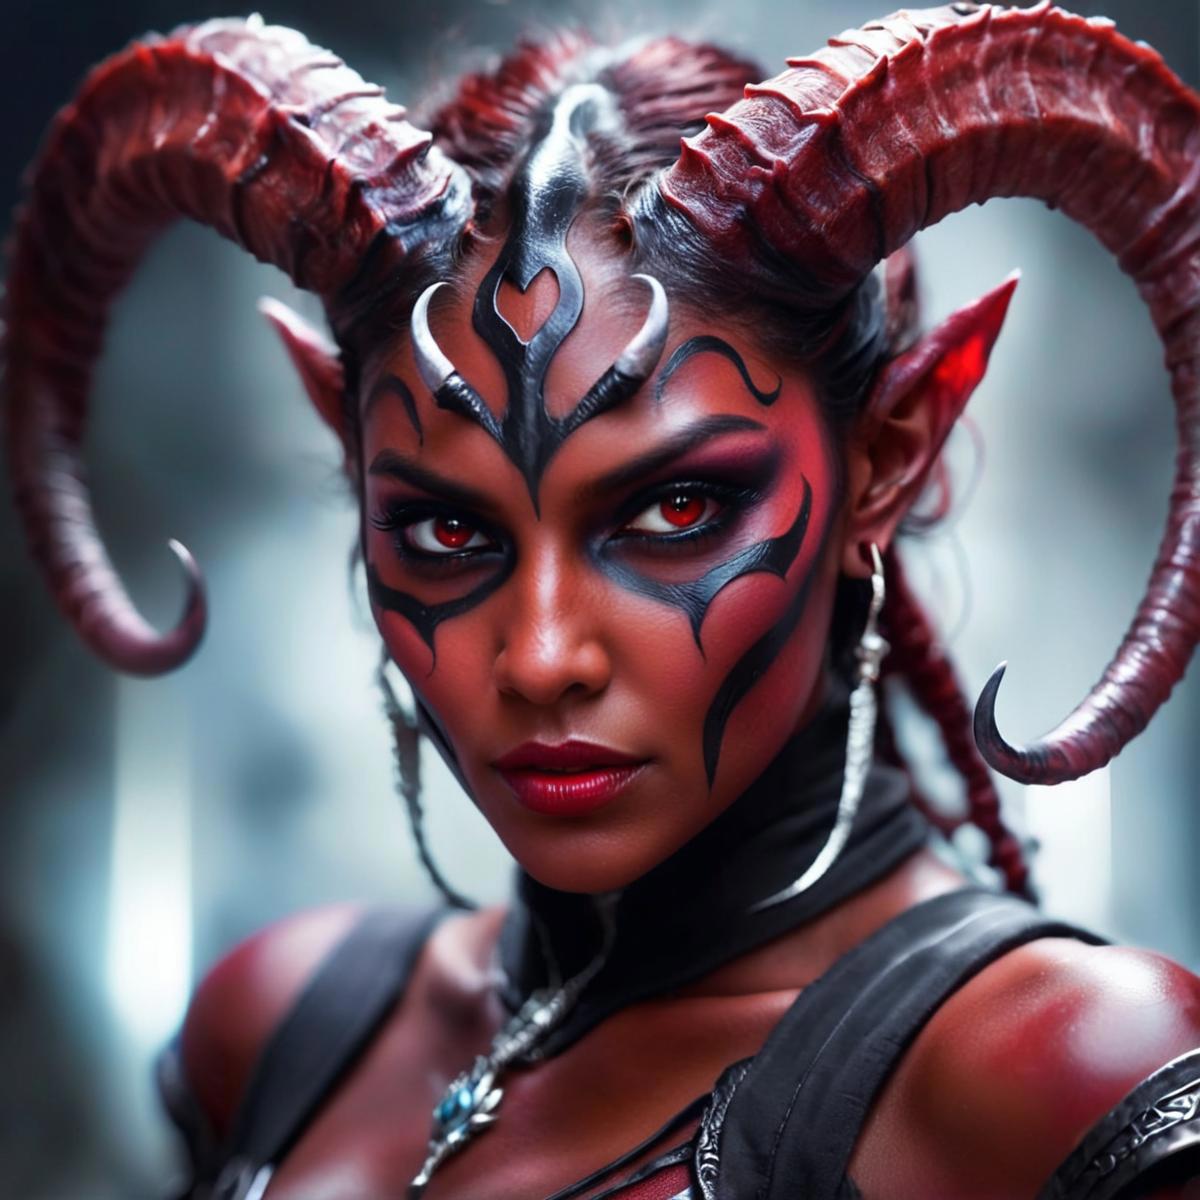 Woman with red and black makeup, including devil horns, and wearing a black top and earrings.